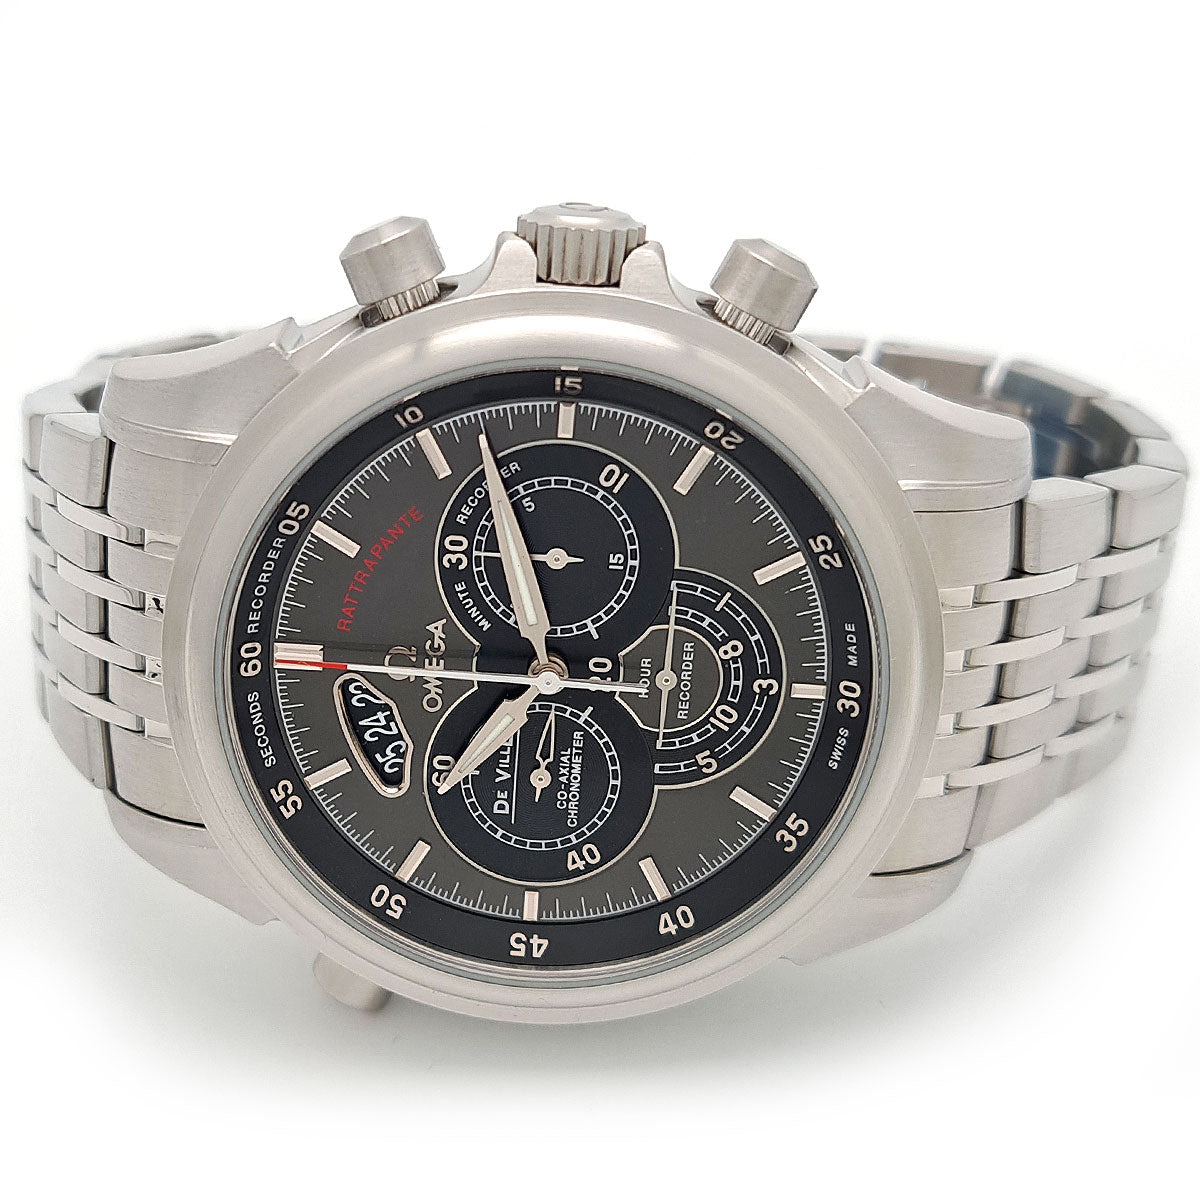 Omega Deville Chronoscope Rattrapante Chronograph Men's Stainless Steel Automatic Watch 422.10.44.51.06.001